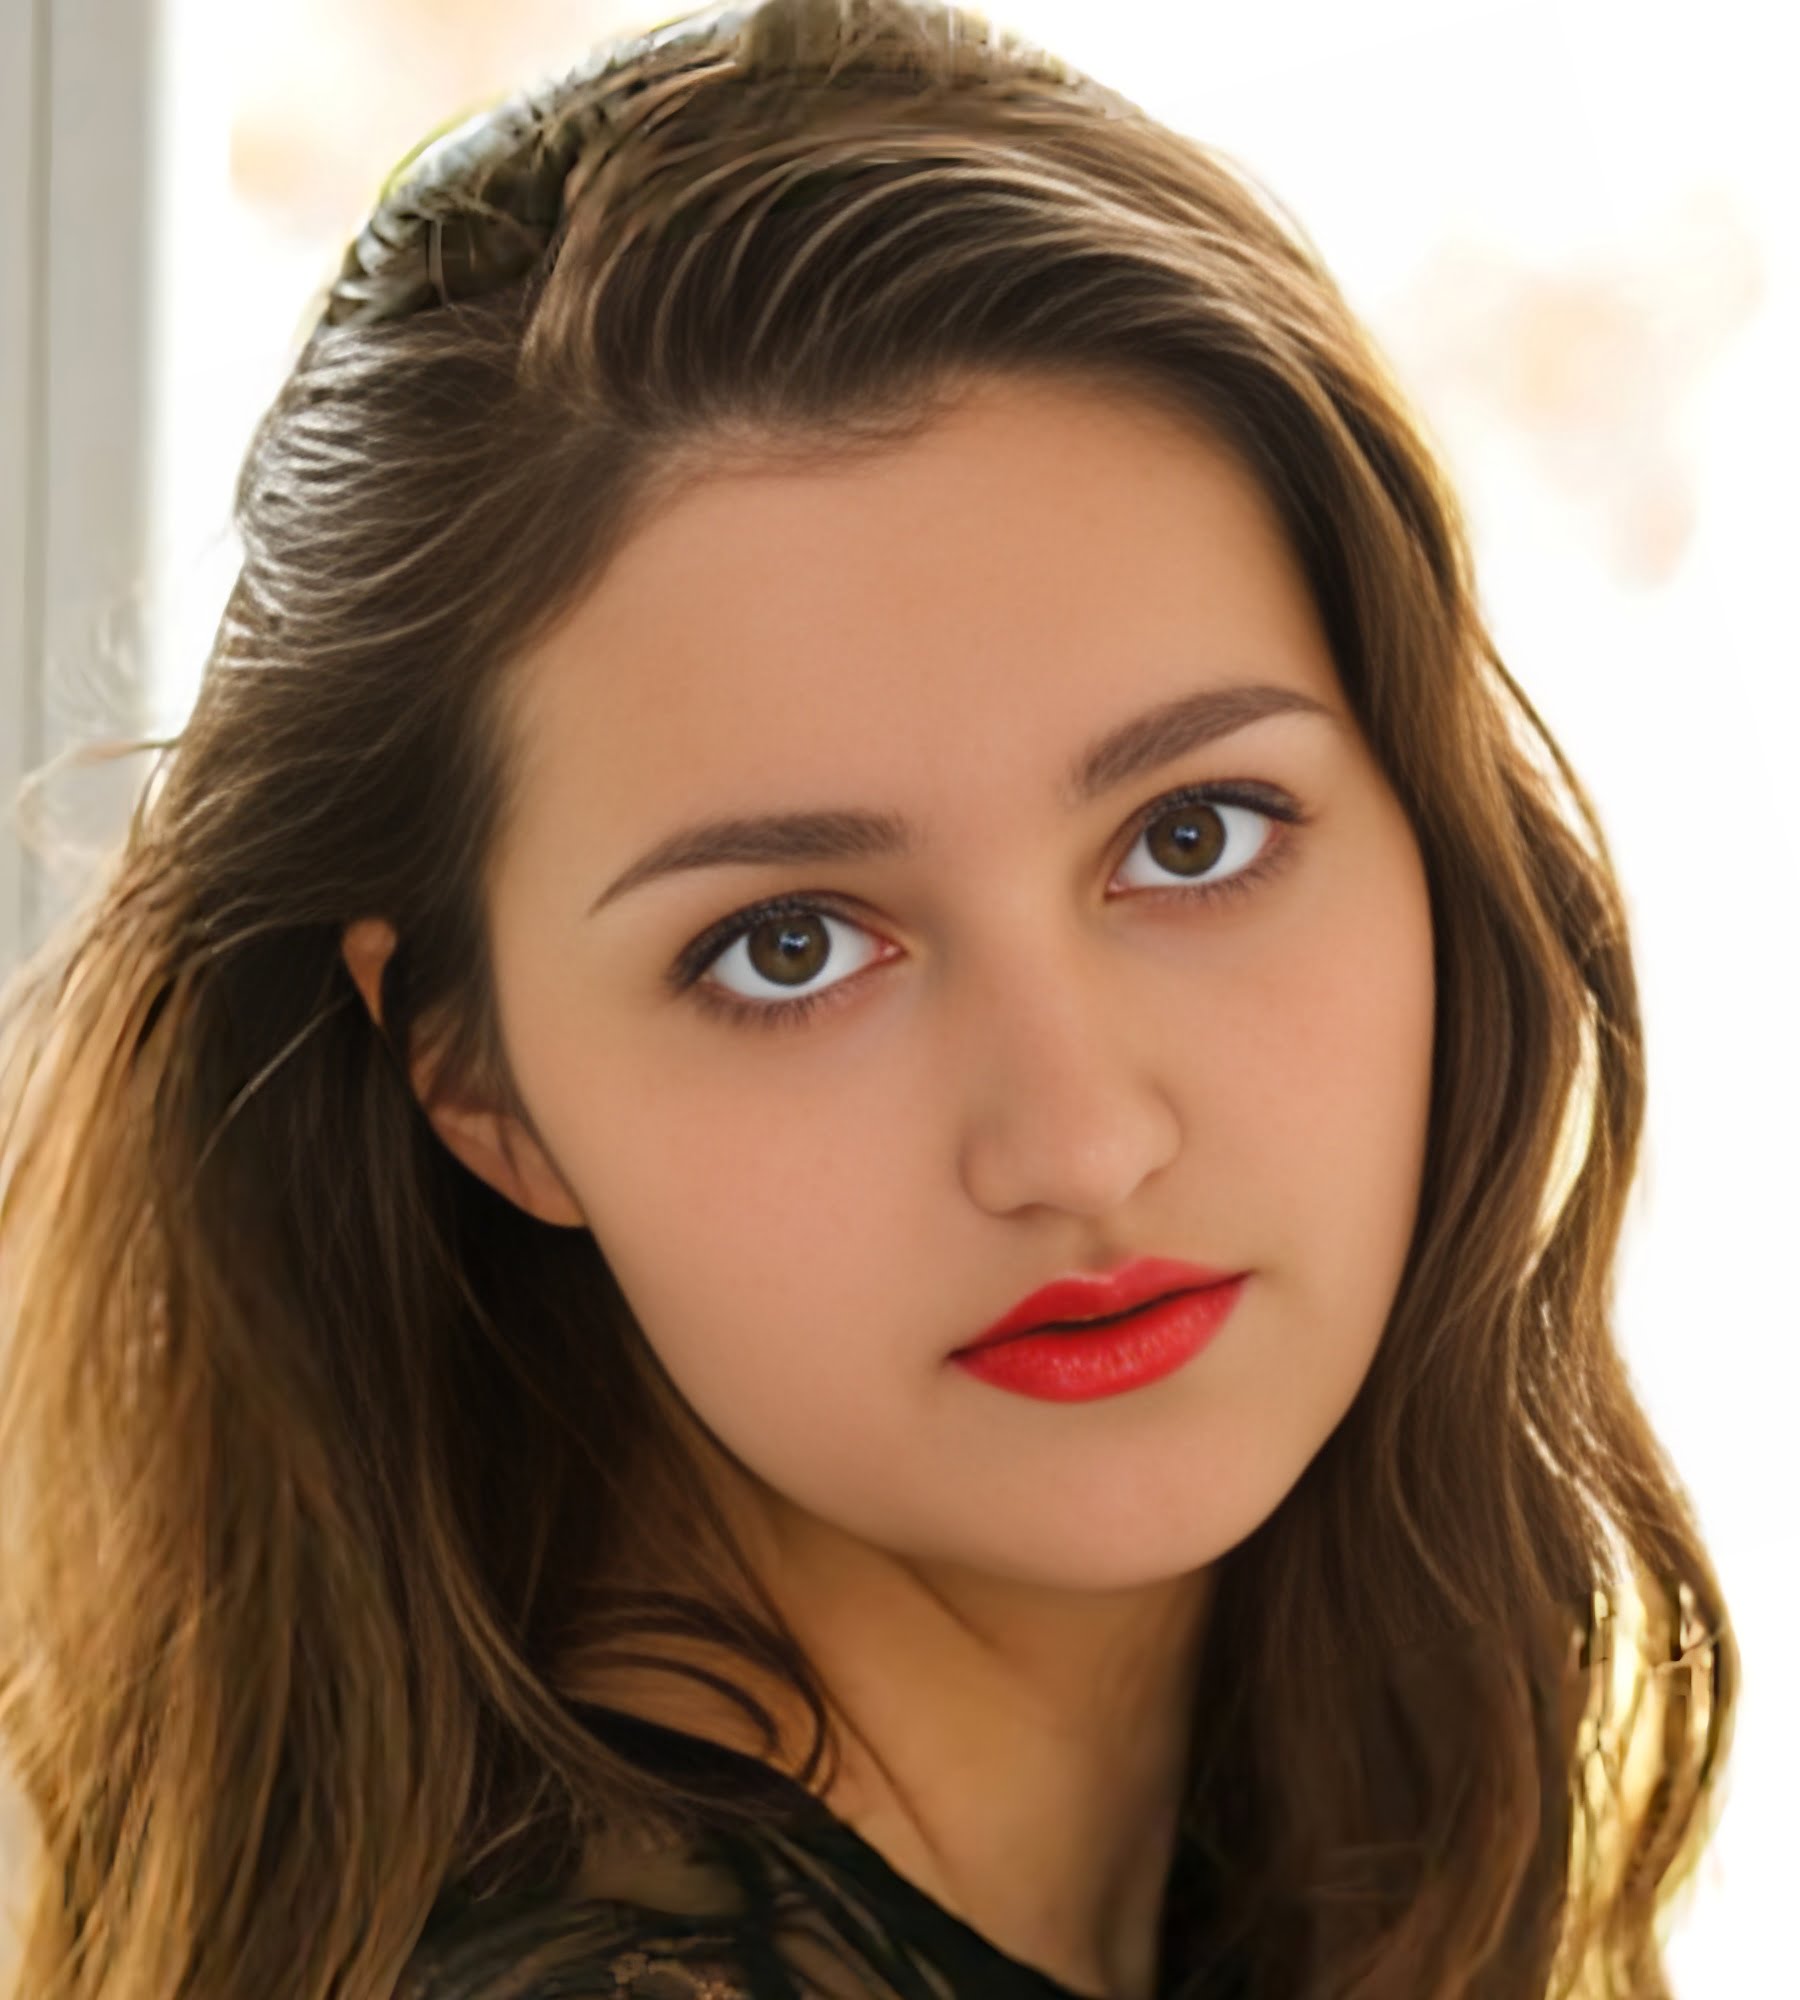 Alisa Horakova Actress Biography Height Weight Videos Wikipedia Age And More 0255